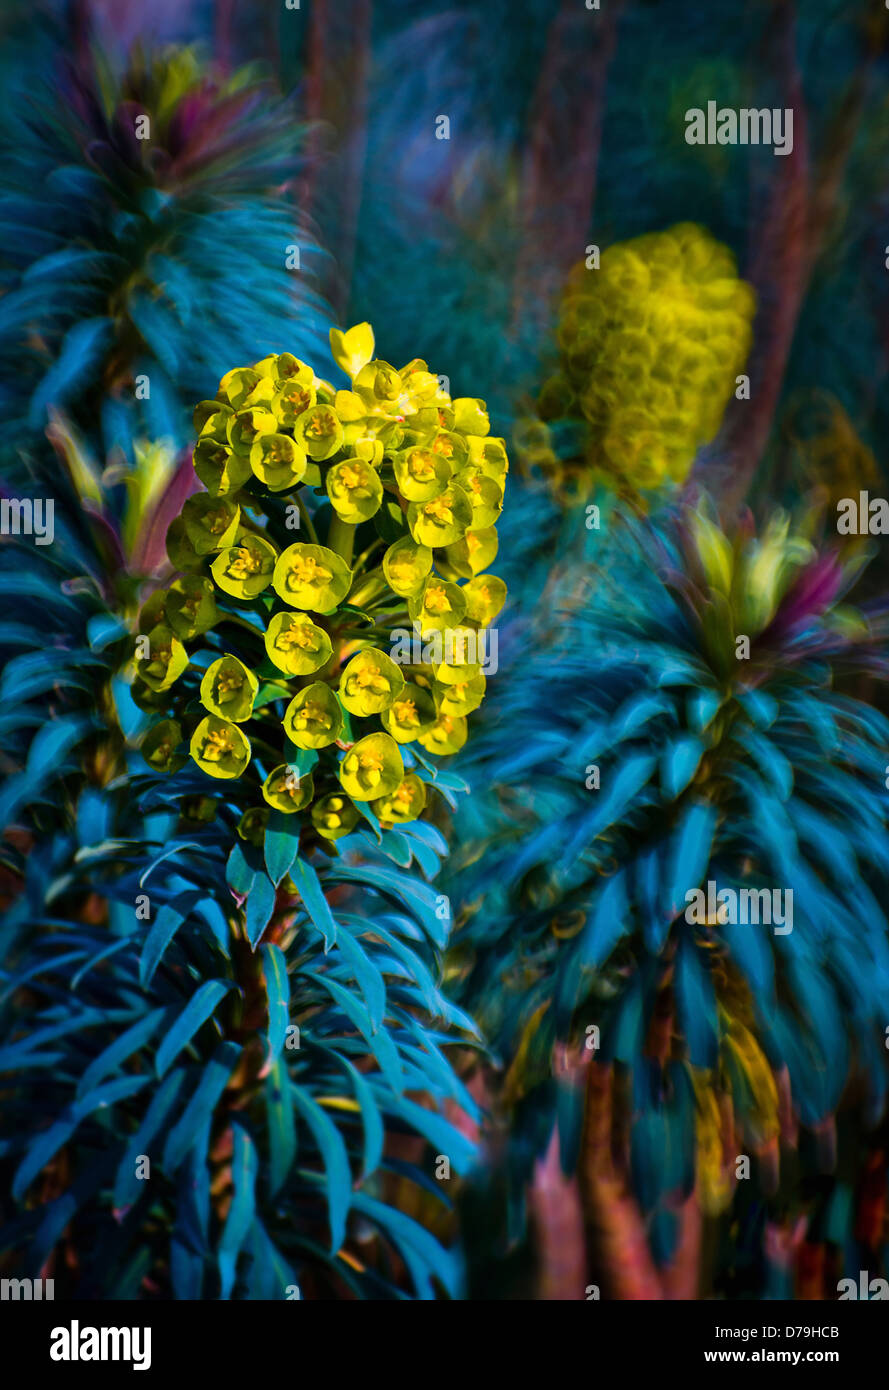 Euphorbia characias wulfenii, spurge. Acid green flower heads consisting of clustered, cup-shaped bracts. Manipulated colours. Stock Photo